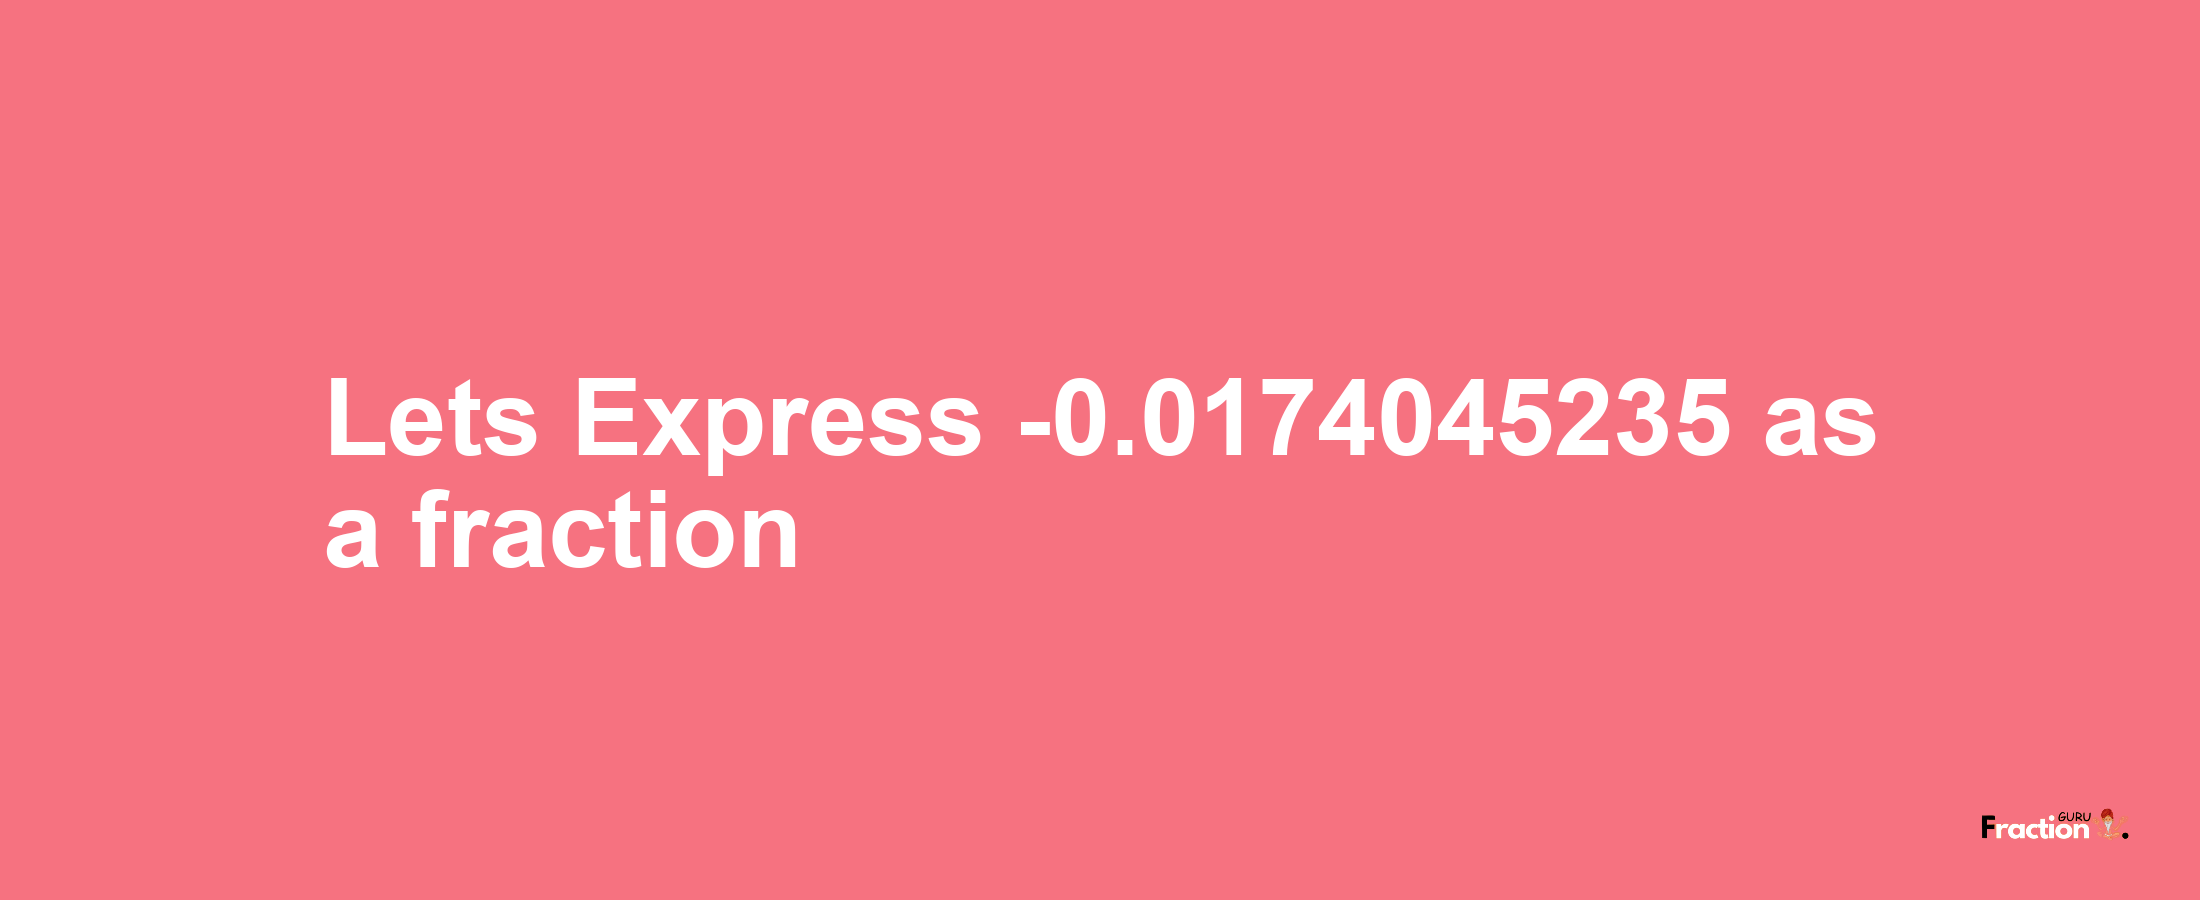 Lets Express -0.0174045235 as afraction